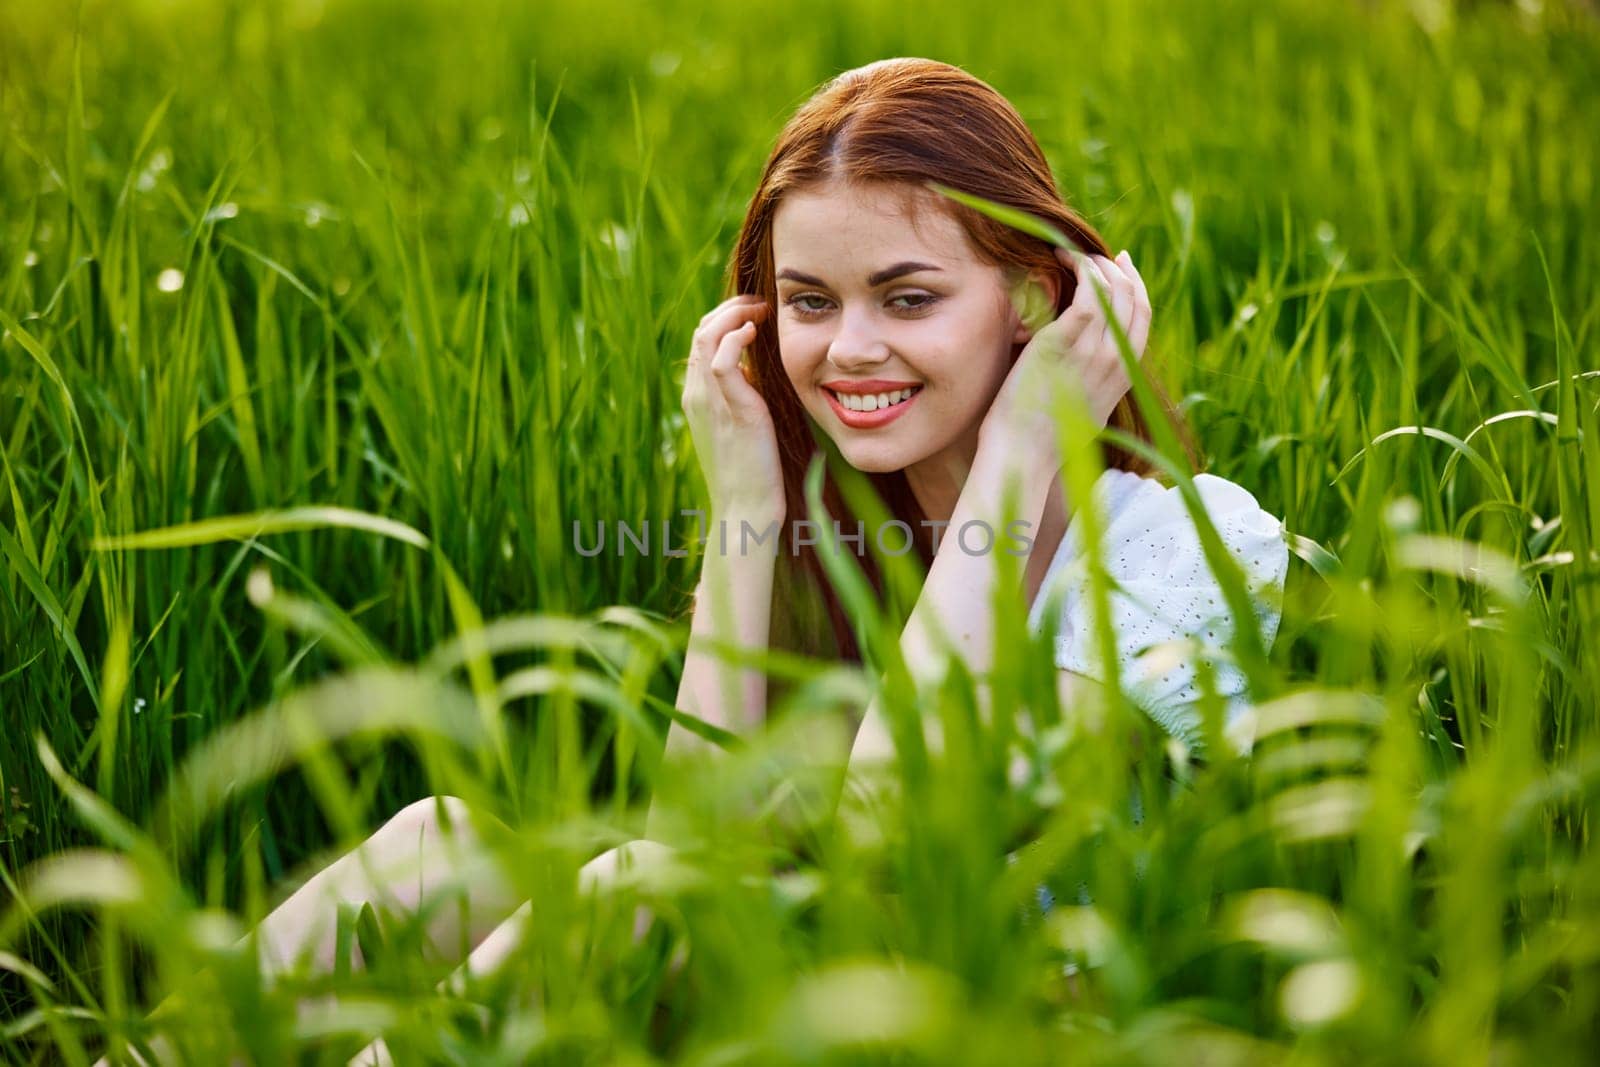 beautiful, elegant woman with red hair sits in tall green grass and smiles by Vichizh